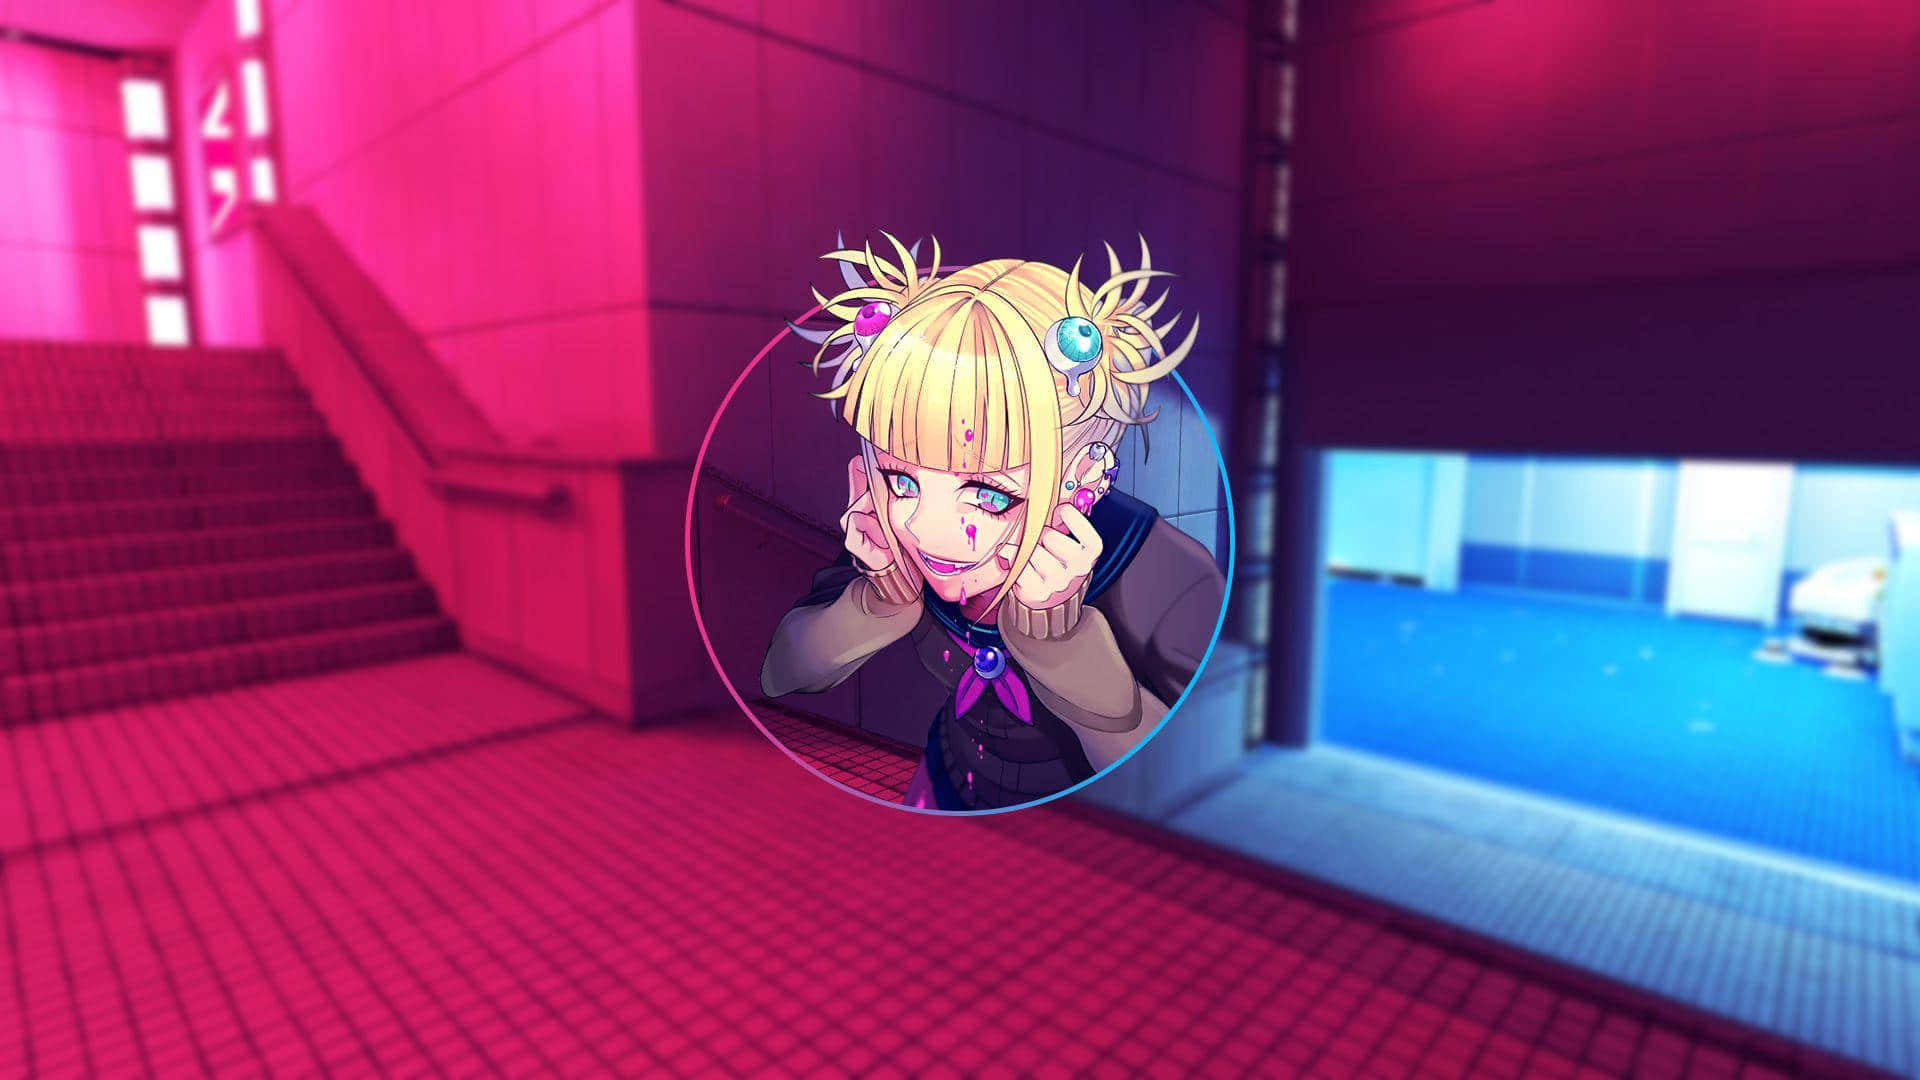 Himiko Toga Aesthetic With Red Staircases Wallpaper